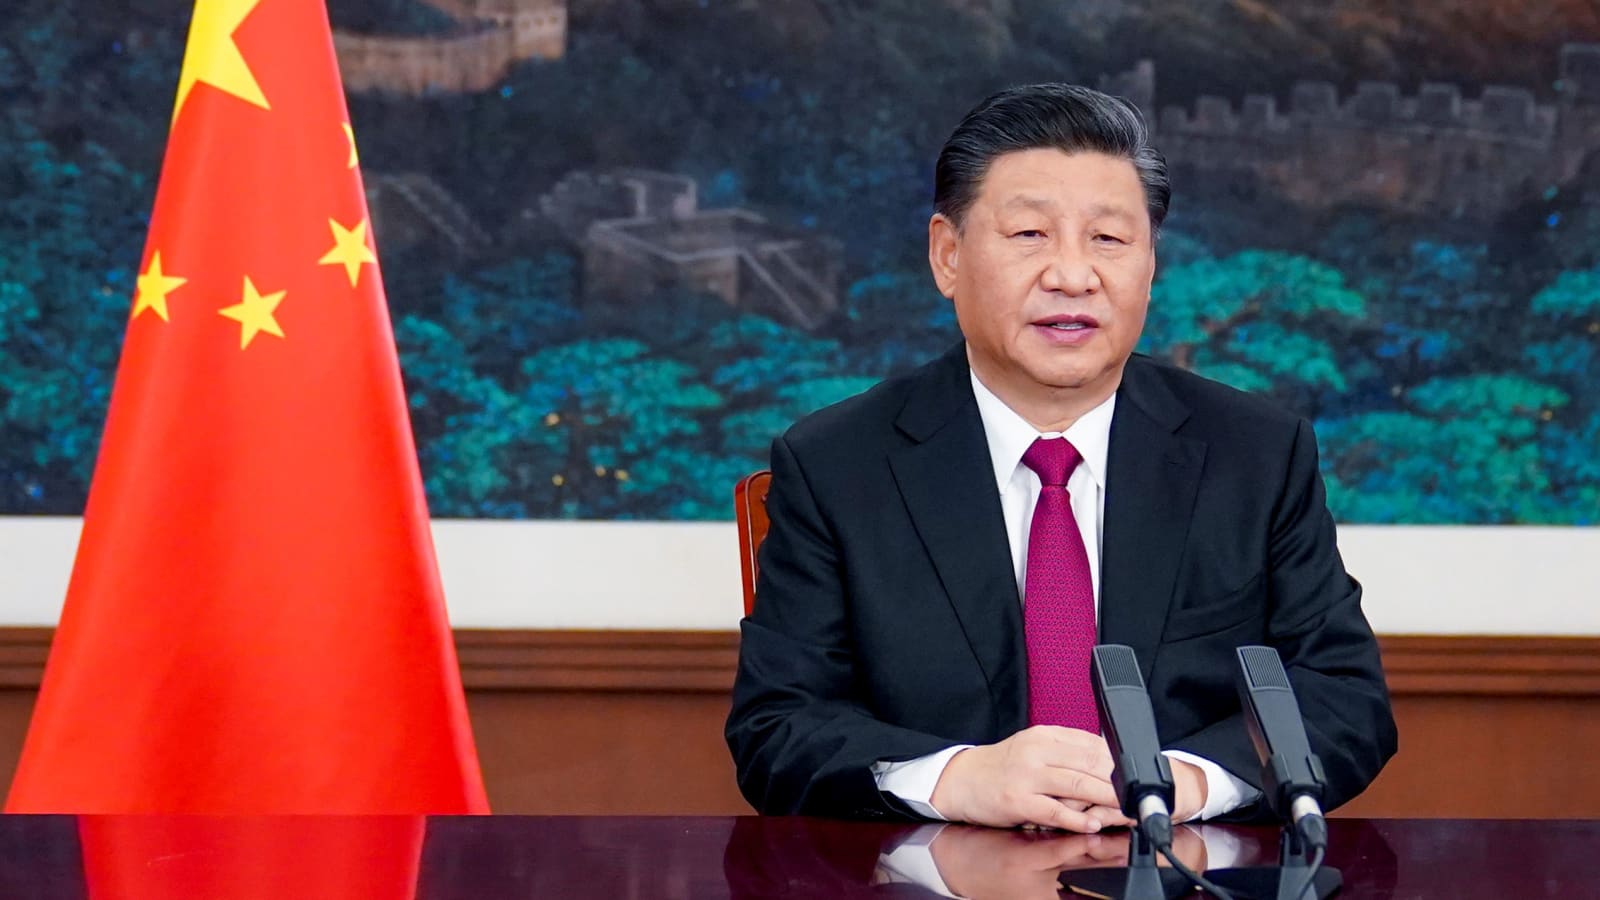 Xi Jinping tightens grip on power in China